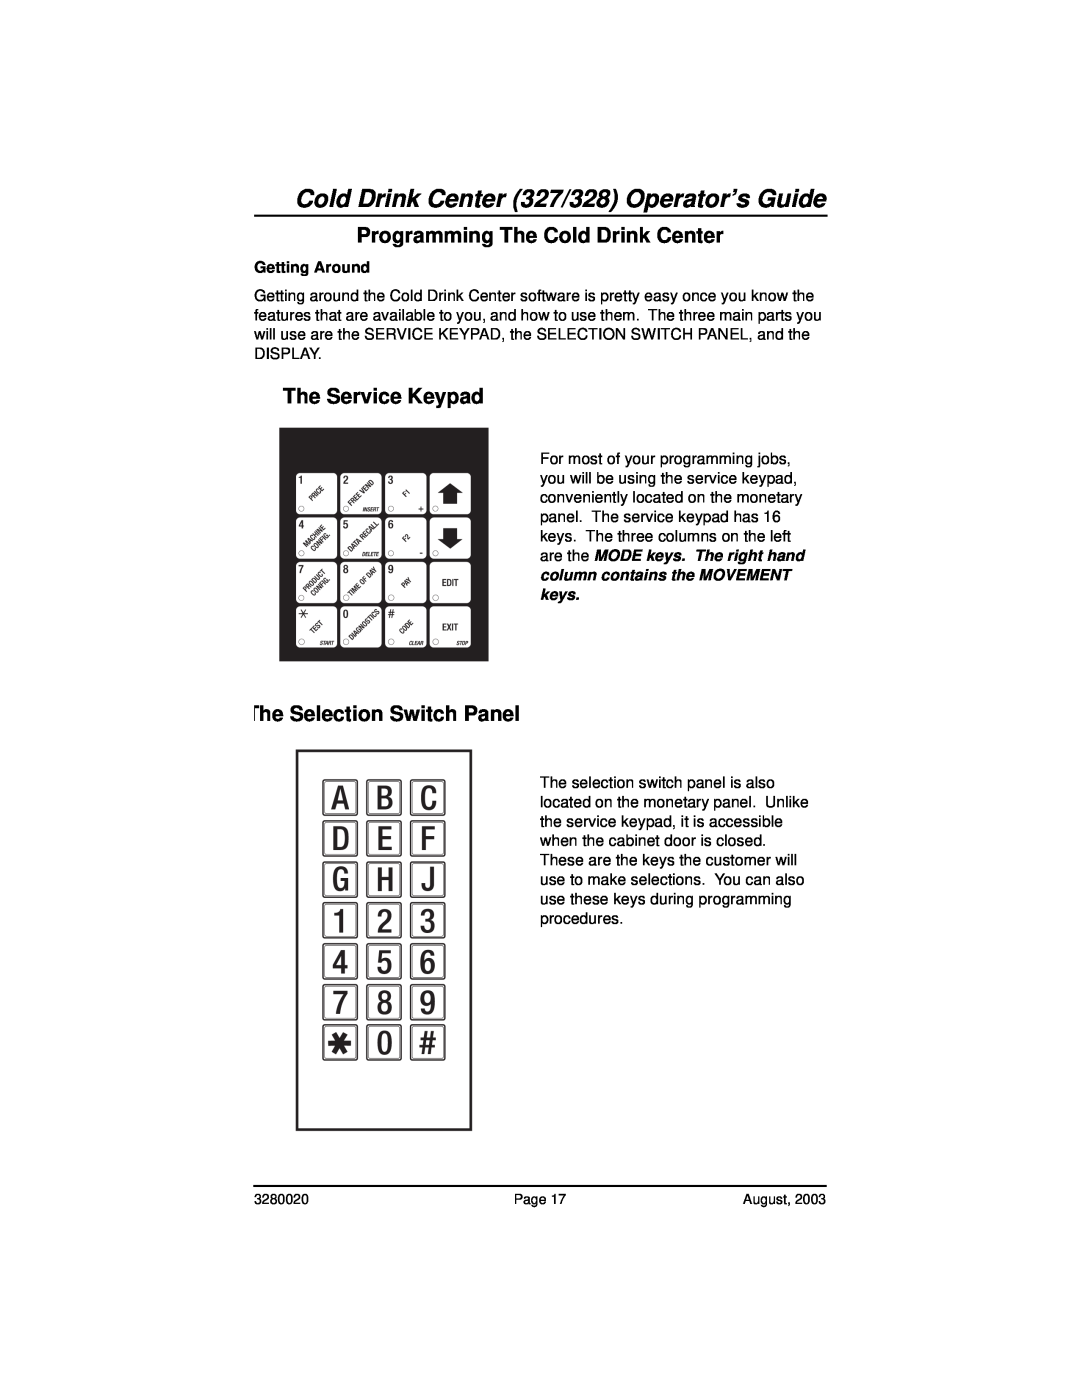 Everpure 325 manual Cold Drink Center 327/328 Operator’s Guide, Programming The Cold Drink Center, The Service Keypad 